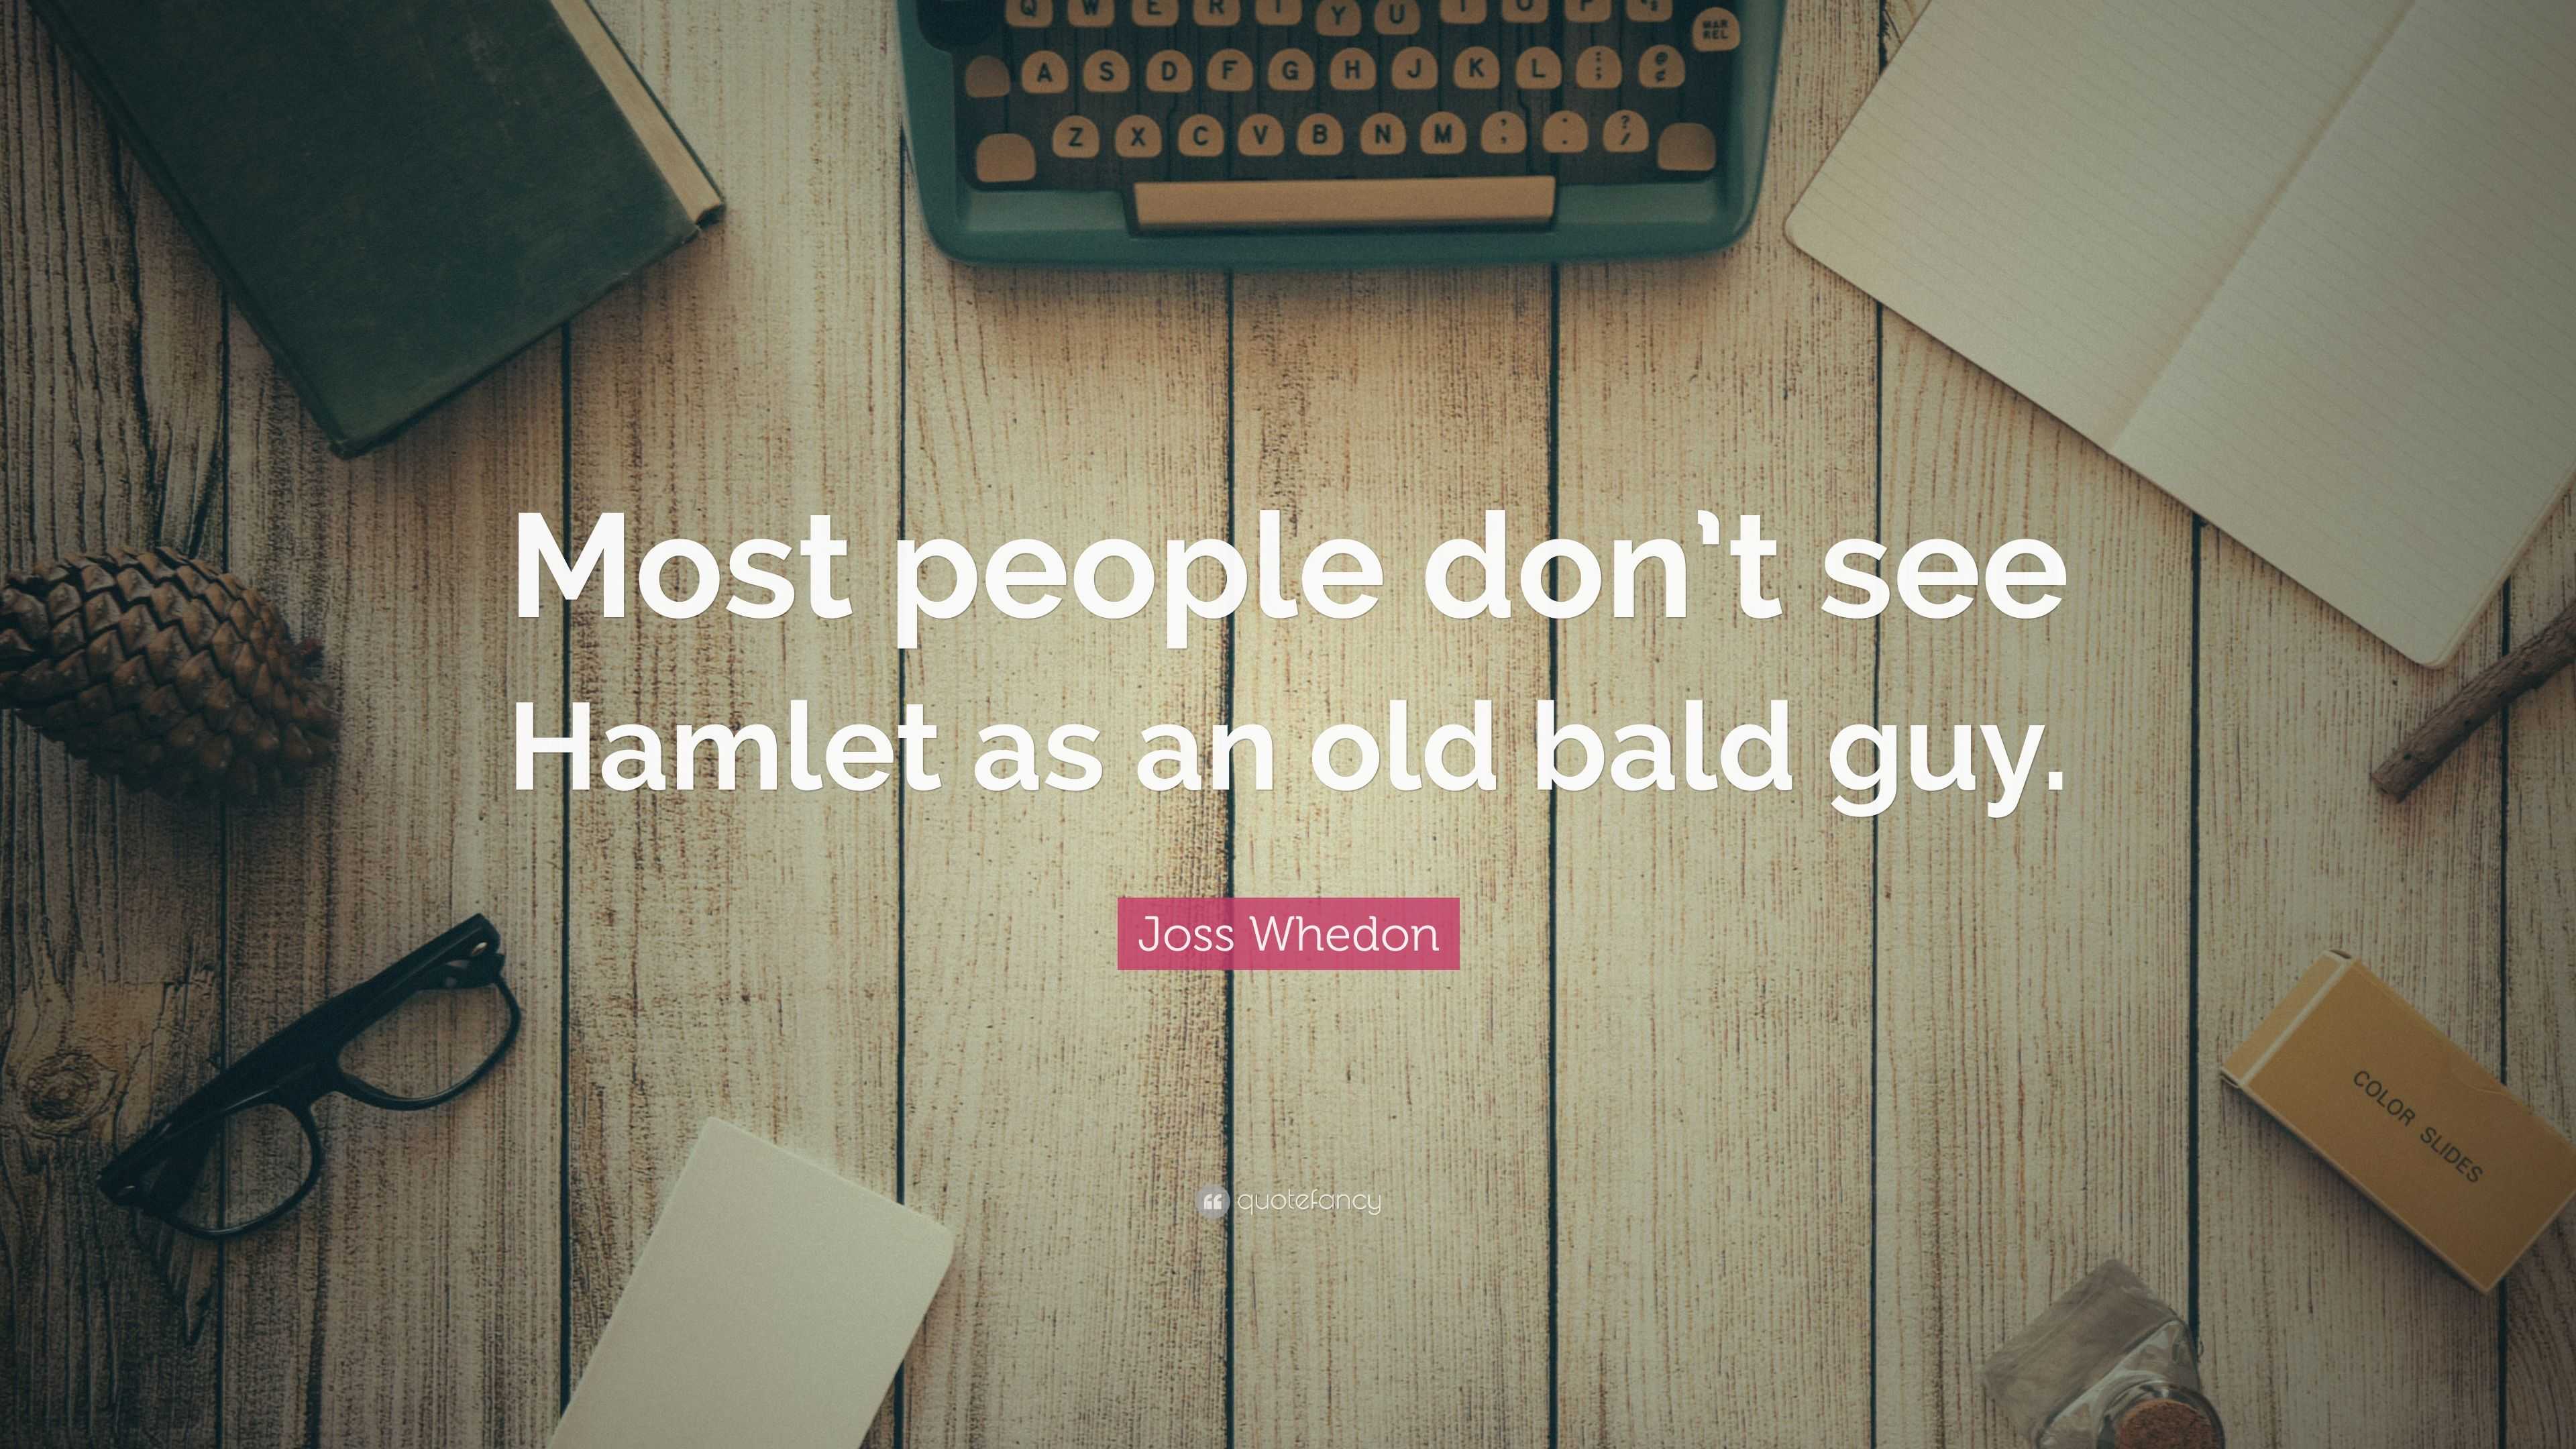 Joss Whedon Quote: “Most people don't see Hamlet as an old bald guy.”